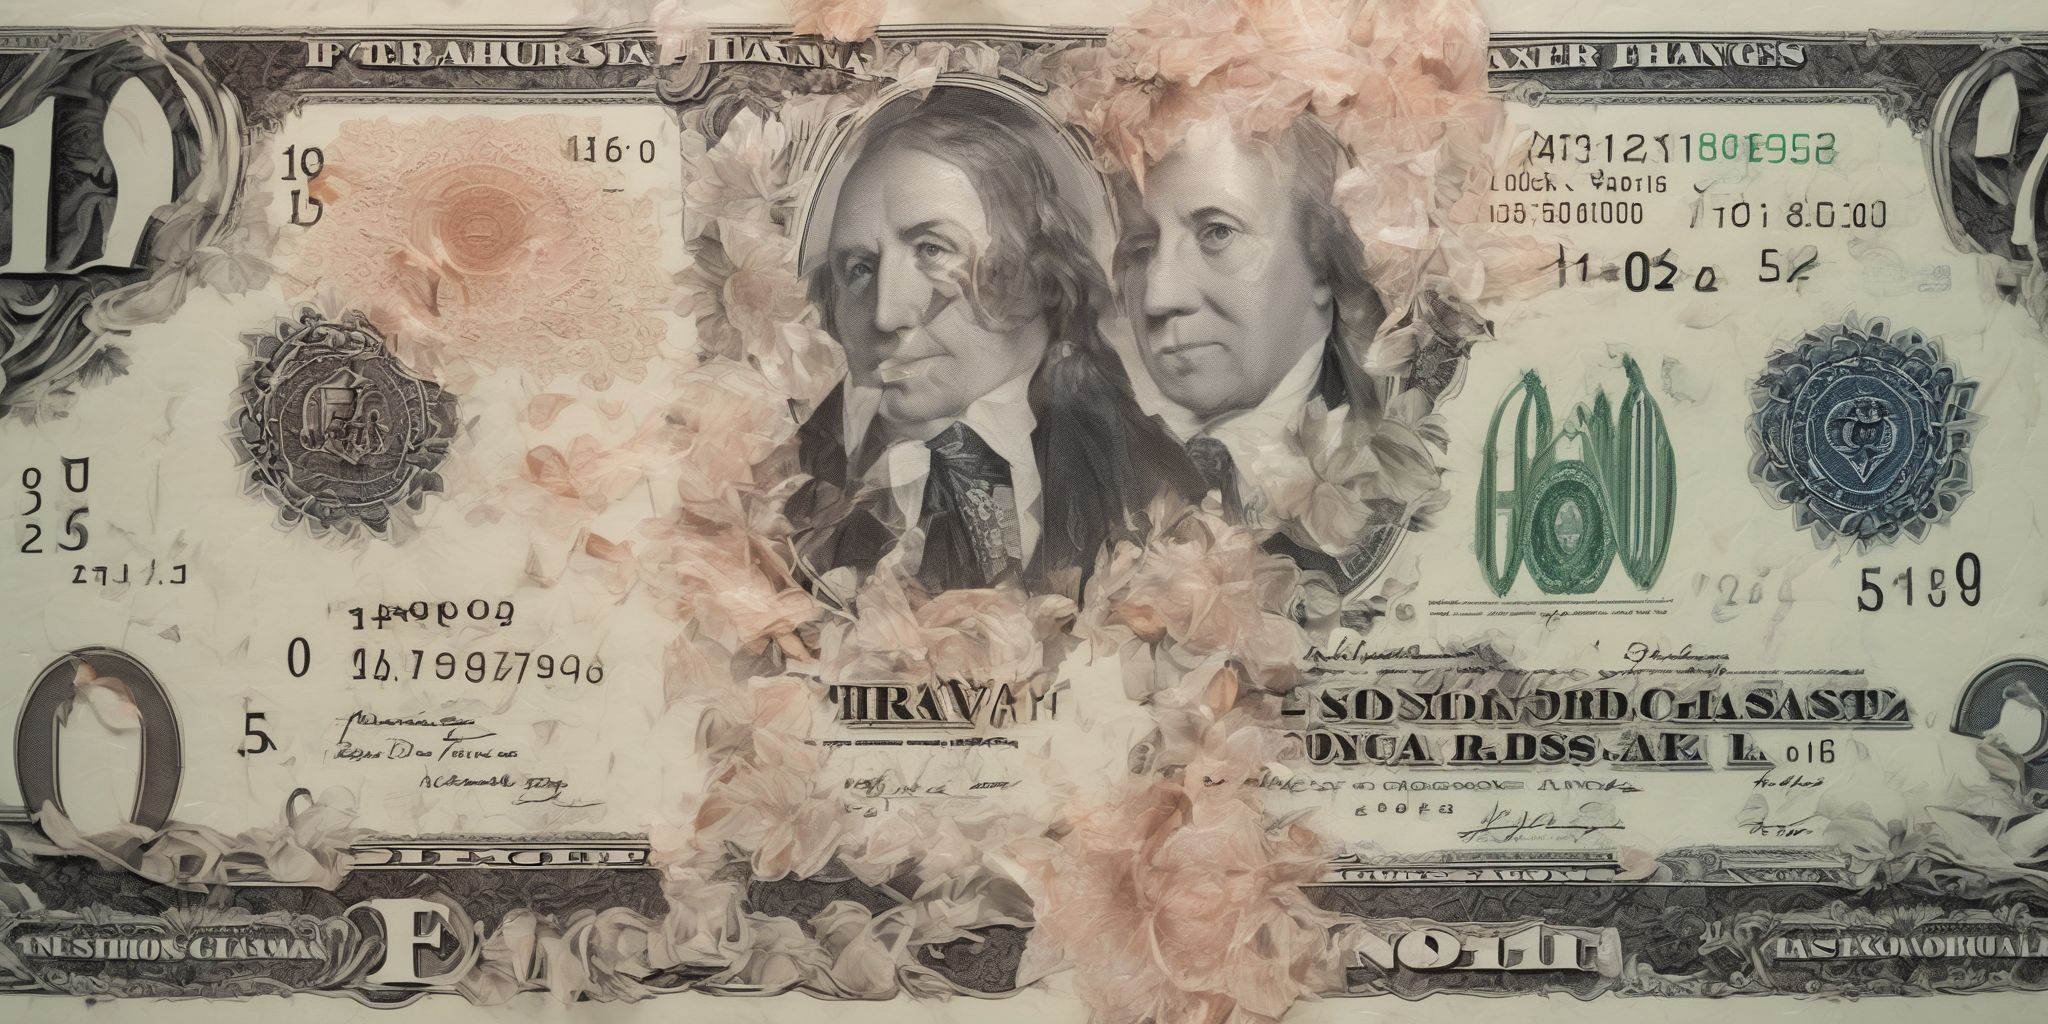 Exchange rate  in realistic, photographic style